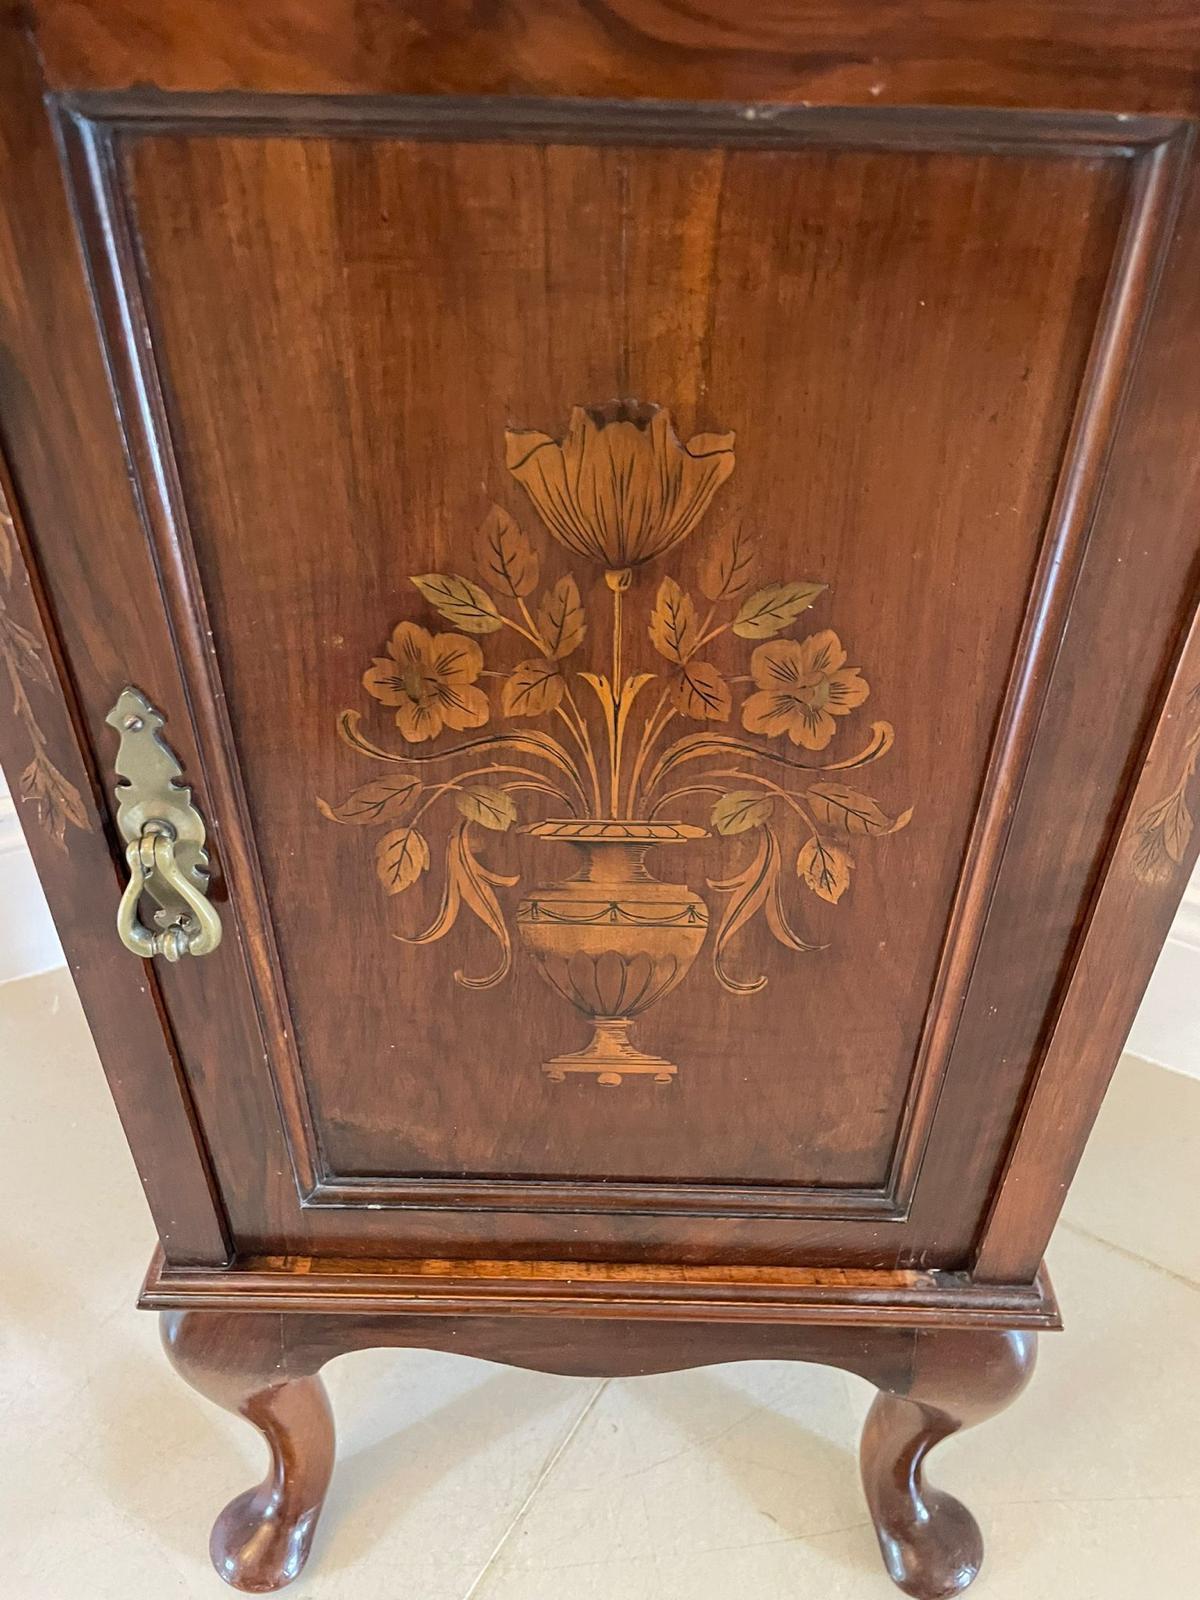 Outstanding quality antique Victorian figured walnut floral marquetry inlaid bedside cabinet 
having a figured walnut top above a single figured walnut outstanding quality floral marquetry inlaid panelled door with original brass handle opening to